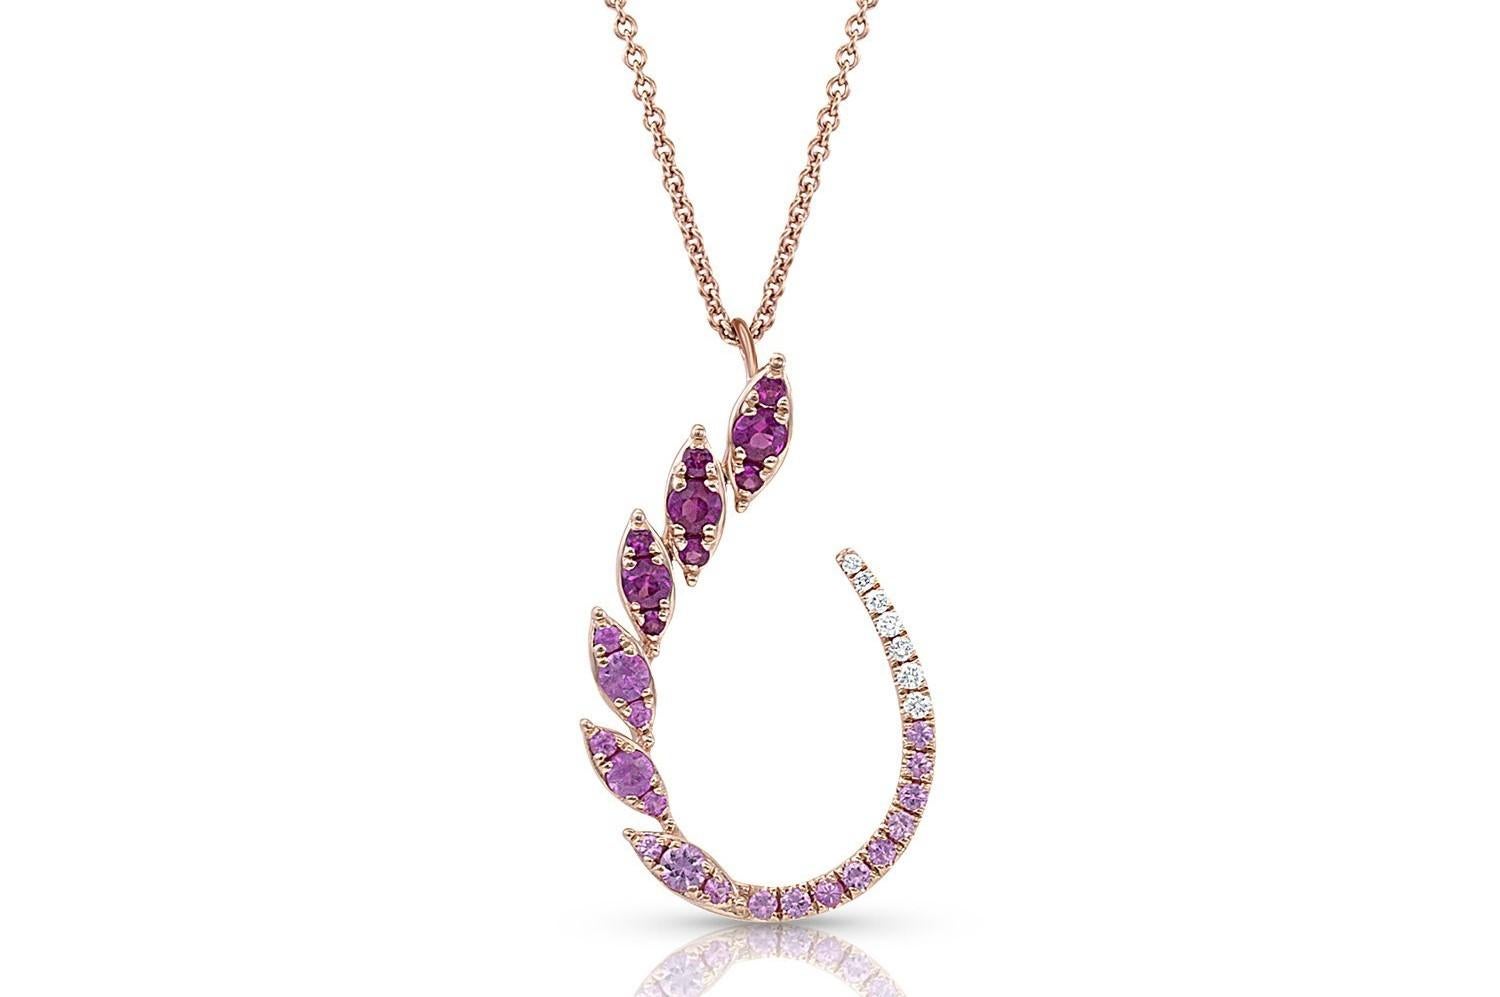 An open pear shape design fluidly graduates from medium pink and light pink sapphires to colorless diamonds. This exquisite 0.44 ctw pink sapphire and 0.04 ctw diamond open shape pendant comes on a matching 18kt rose gold chain.